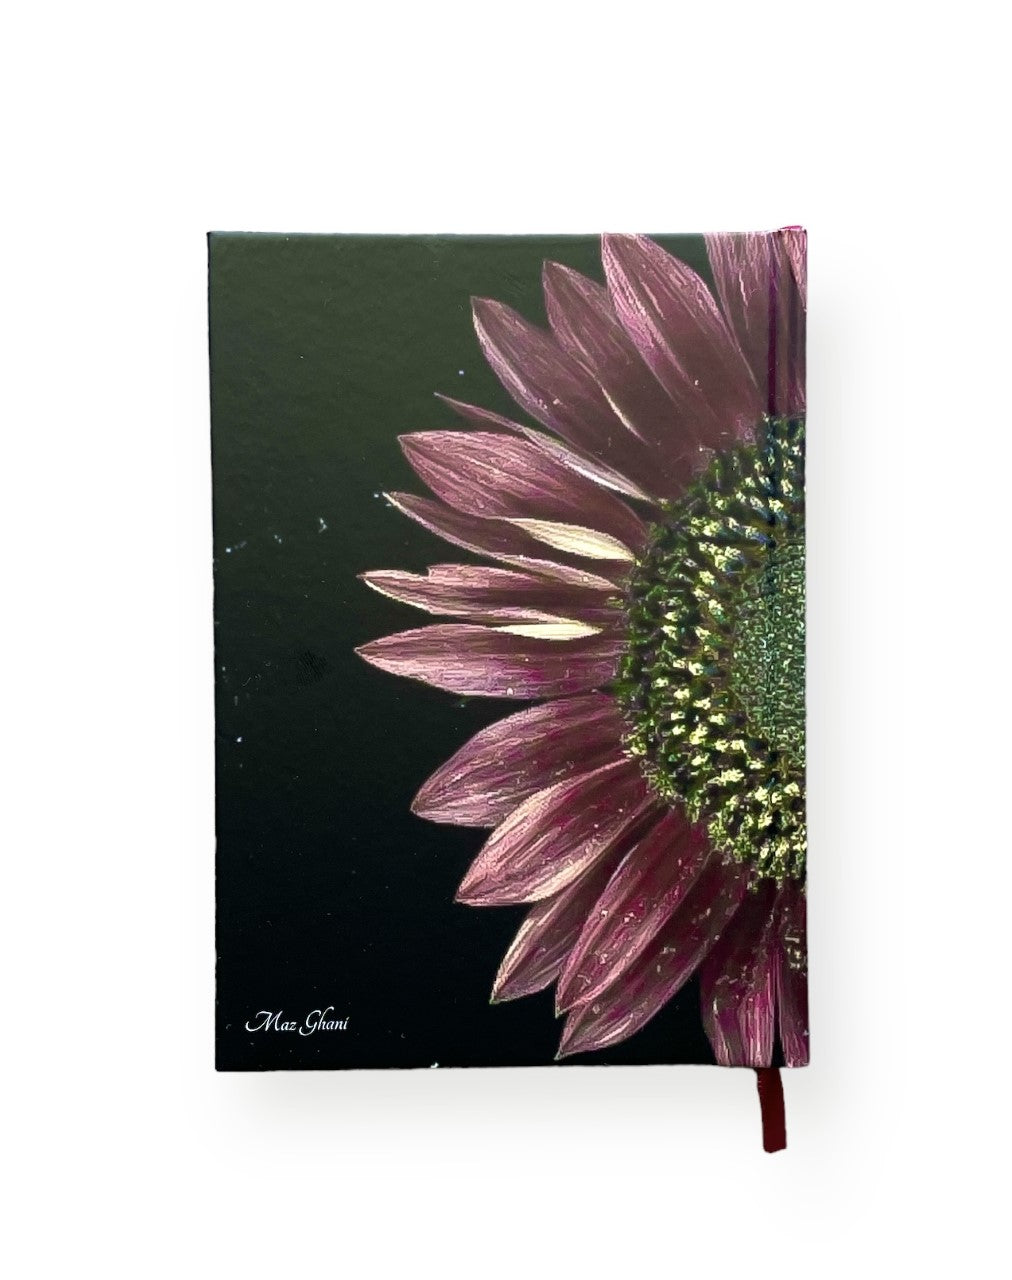 maz ghani, wildflowers, hardcover journal, journal, book, write, luxury gifts, gifts, shop, colorful, flowers, botanical, helianthus